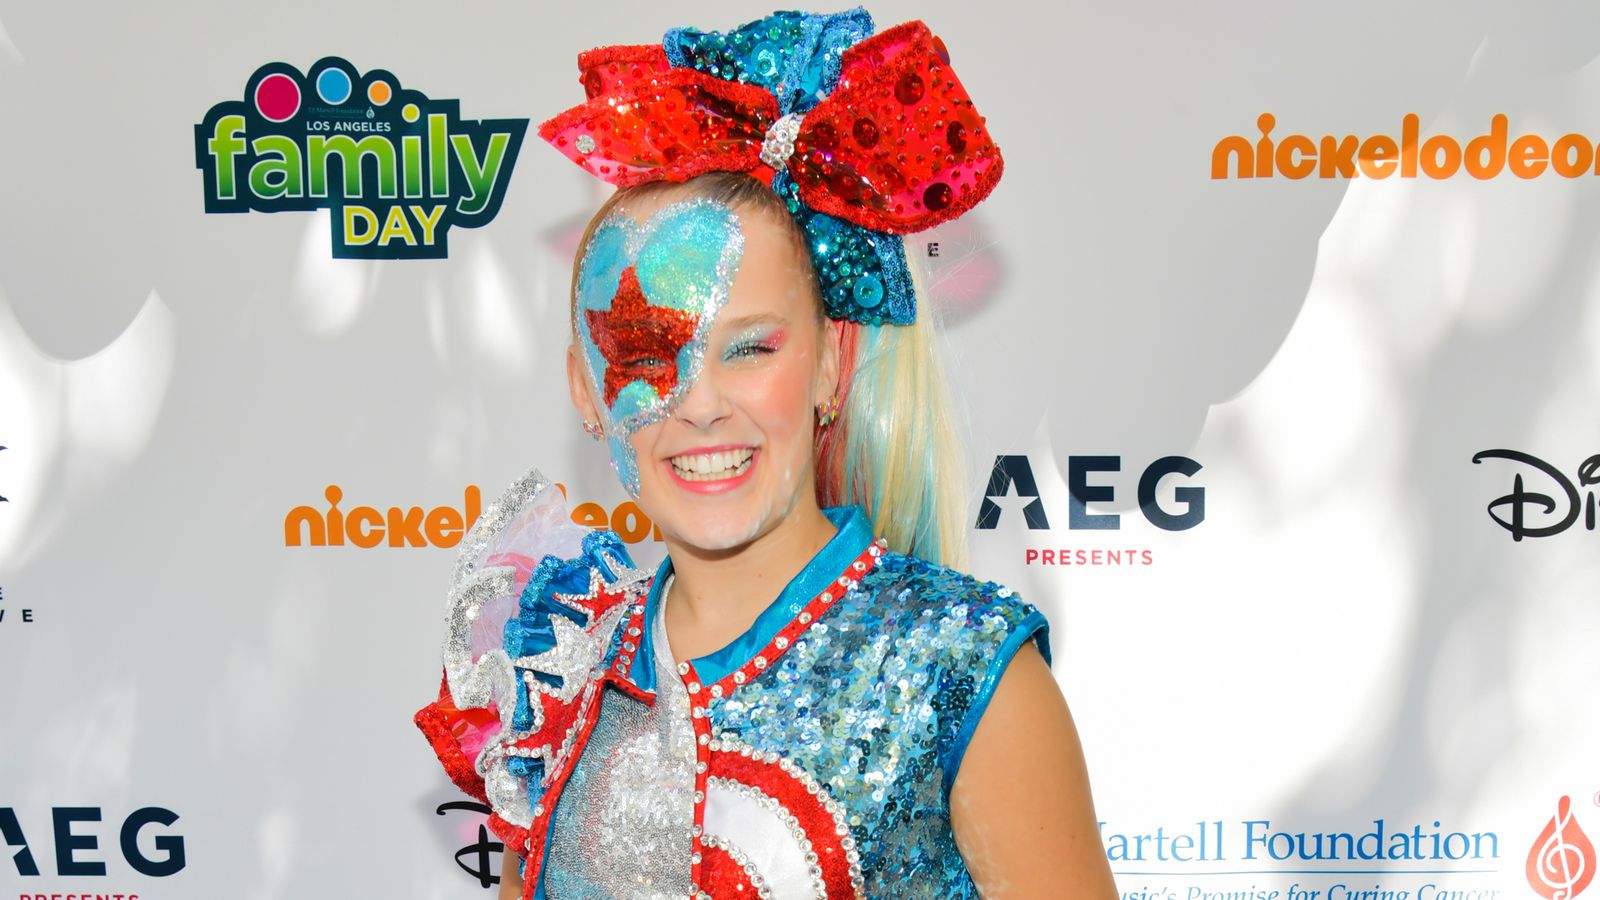 Jojo Siwa Youtube Star Left Crying For Hours By People Driving By My House And Shouting Mean Things Ents Arts News Sky News